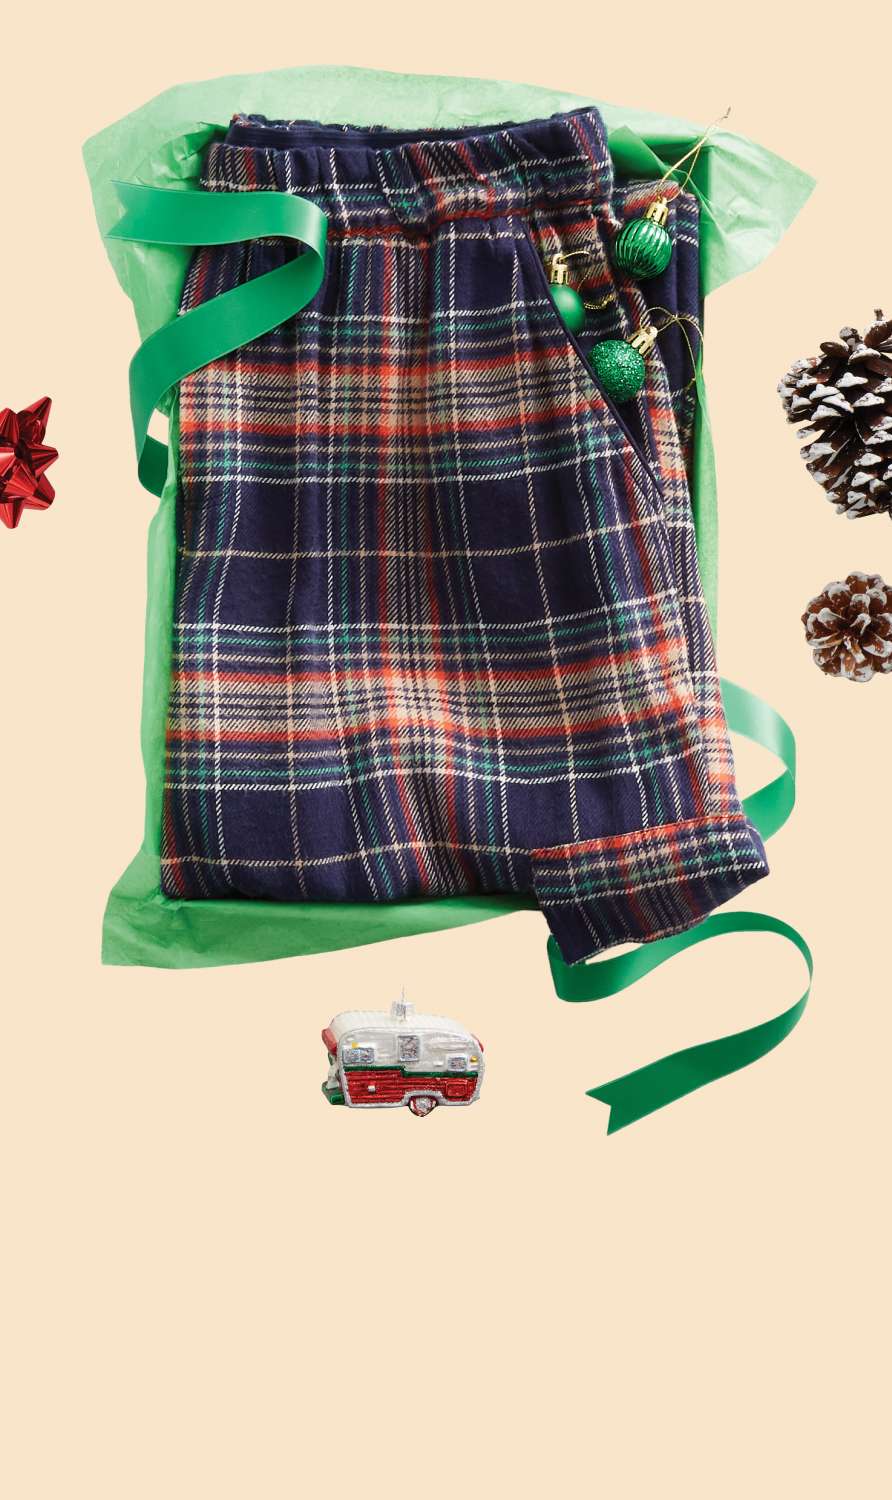 Cozy Gifts, Stocking Stuffers & Top Gifts | Aerie